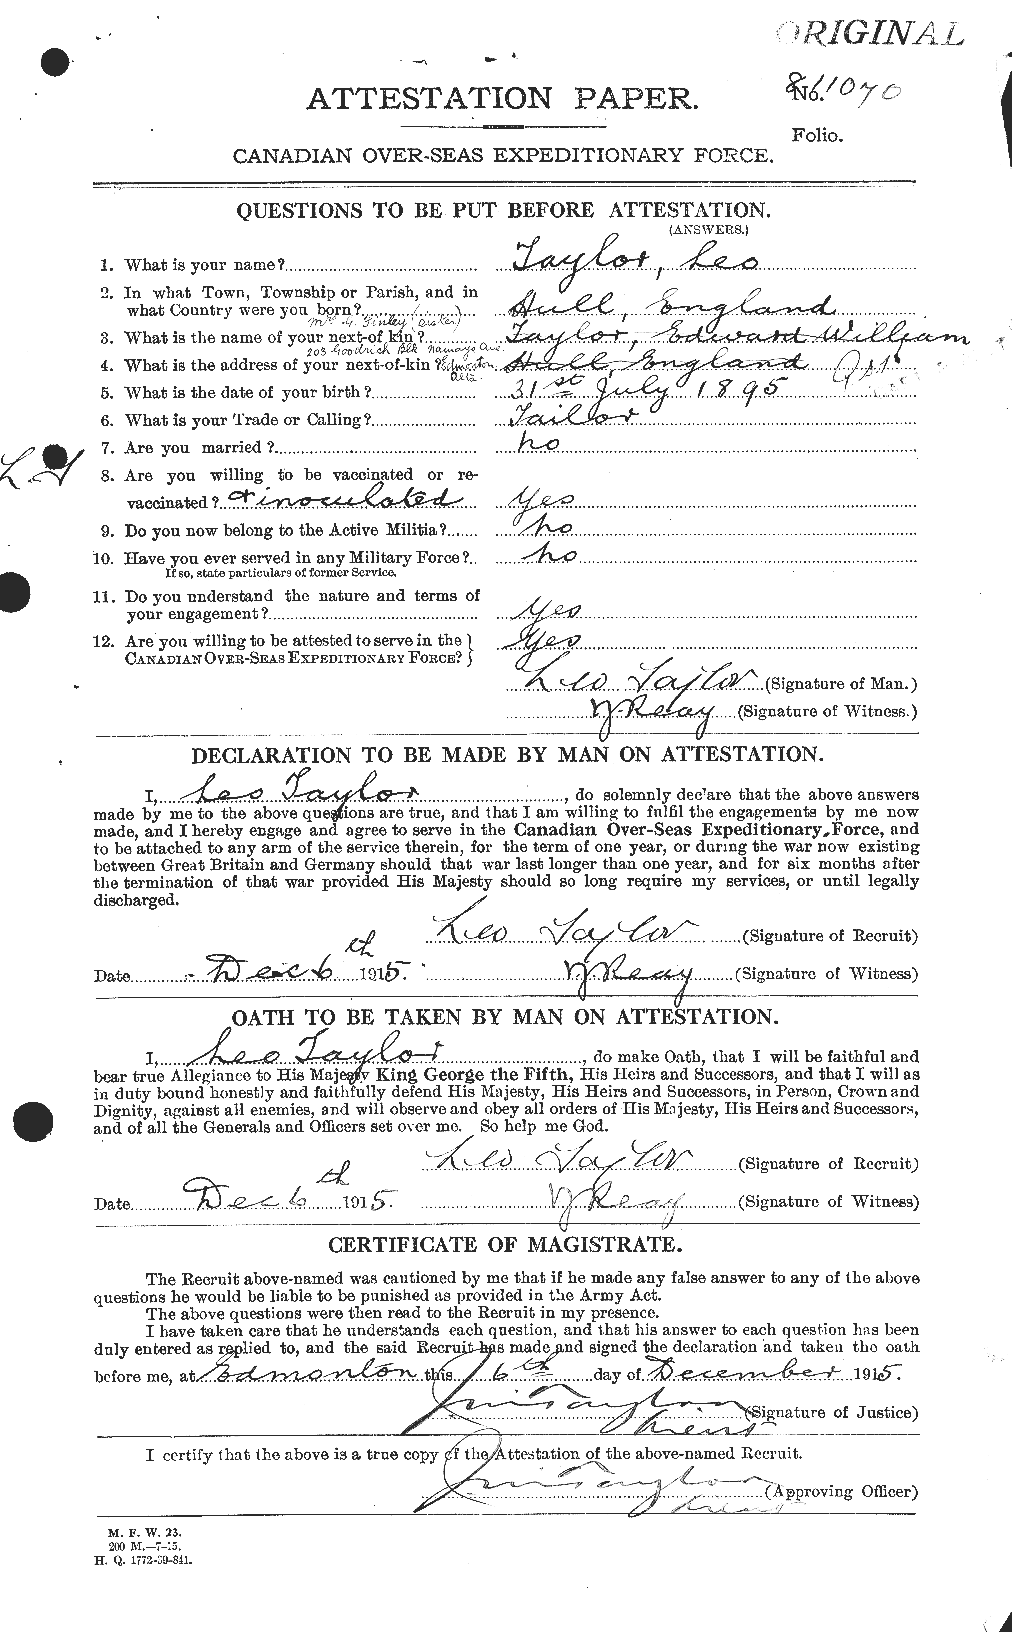 Personnel Records of the First World War - CEF 627619a